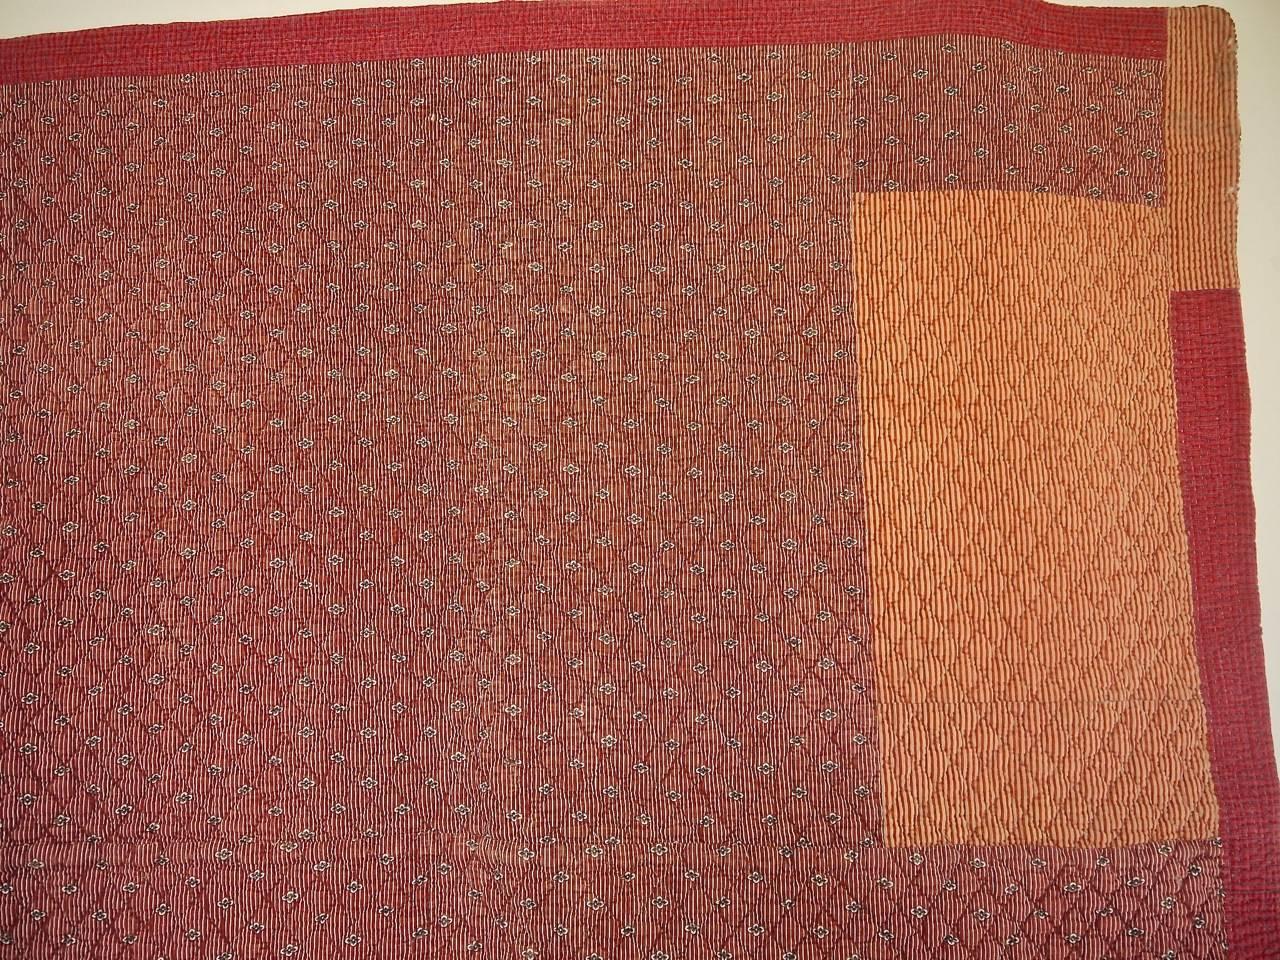 Rustic Late 18th Century Antique French Red Print Cotton Quilt